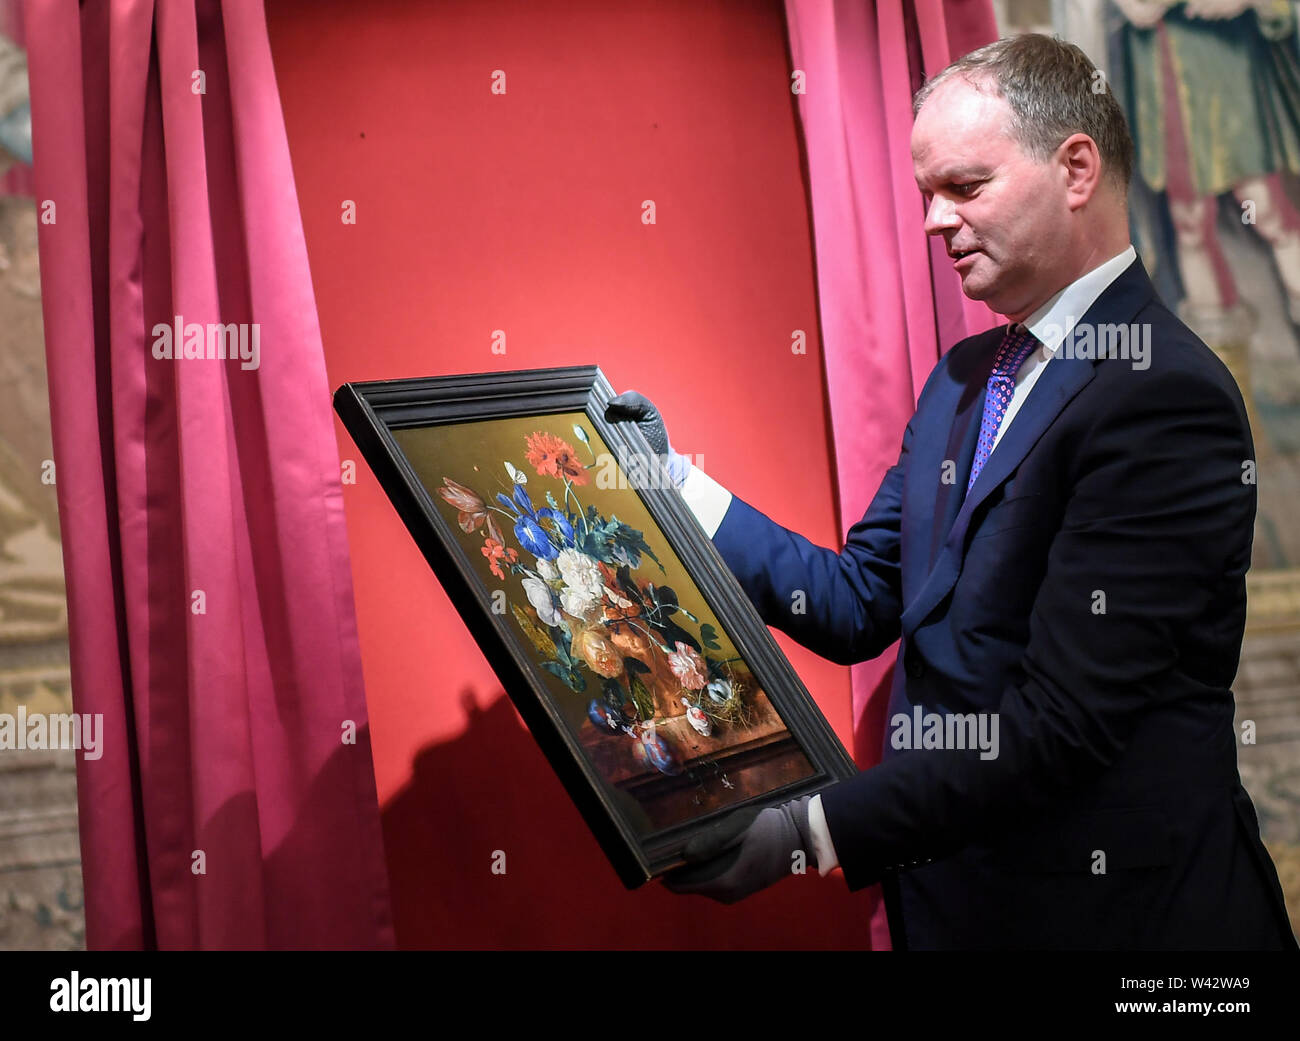 Uffizi Director High Resolution Stock Photography and Images - Alamy